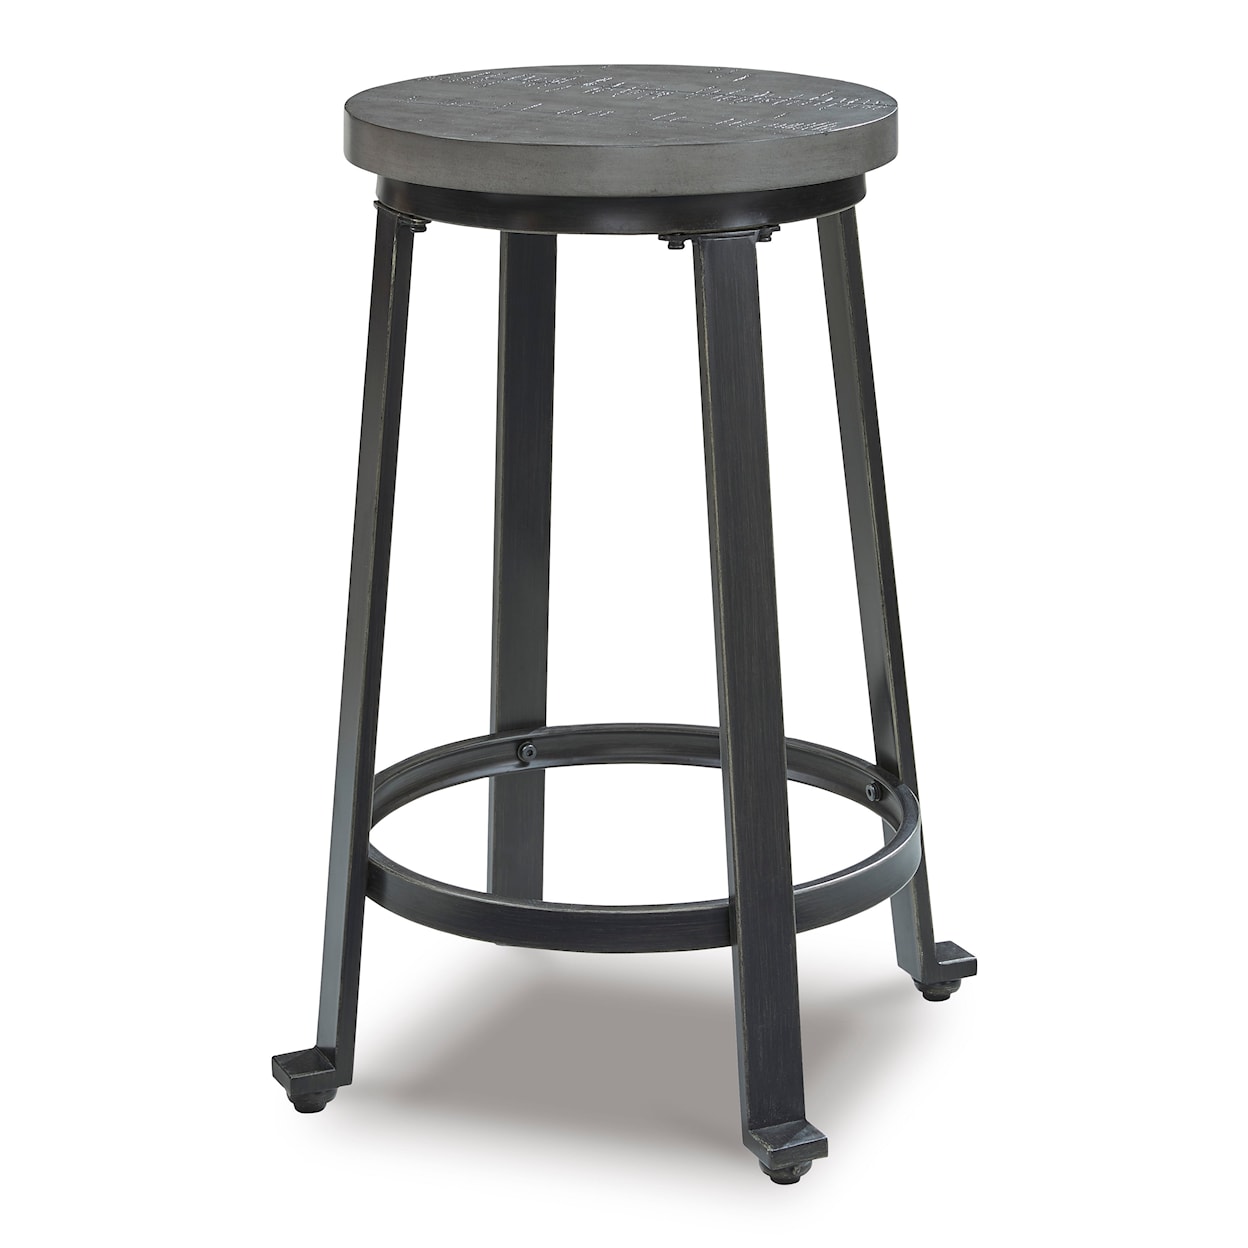 Benchcraft Challiman Counter Height Stool